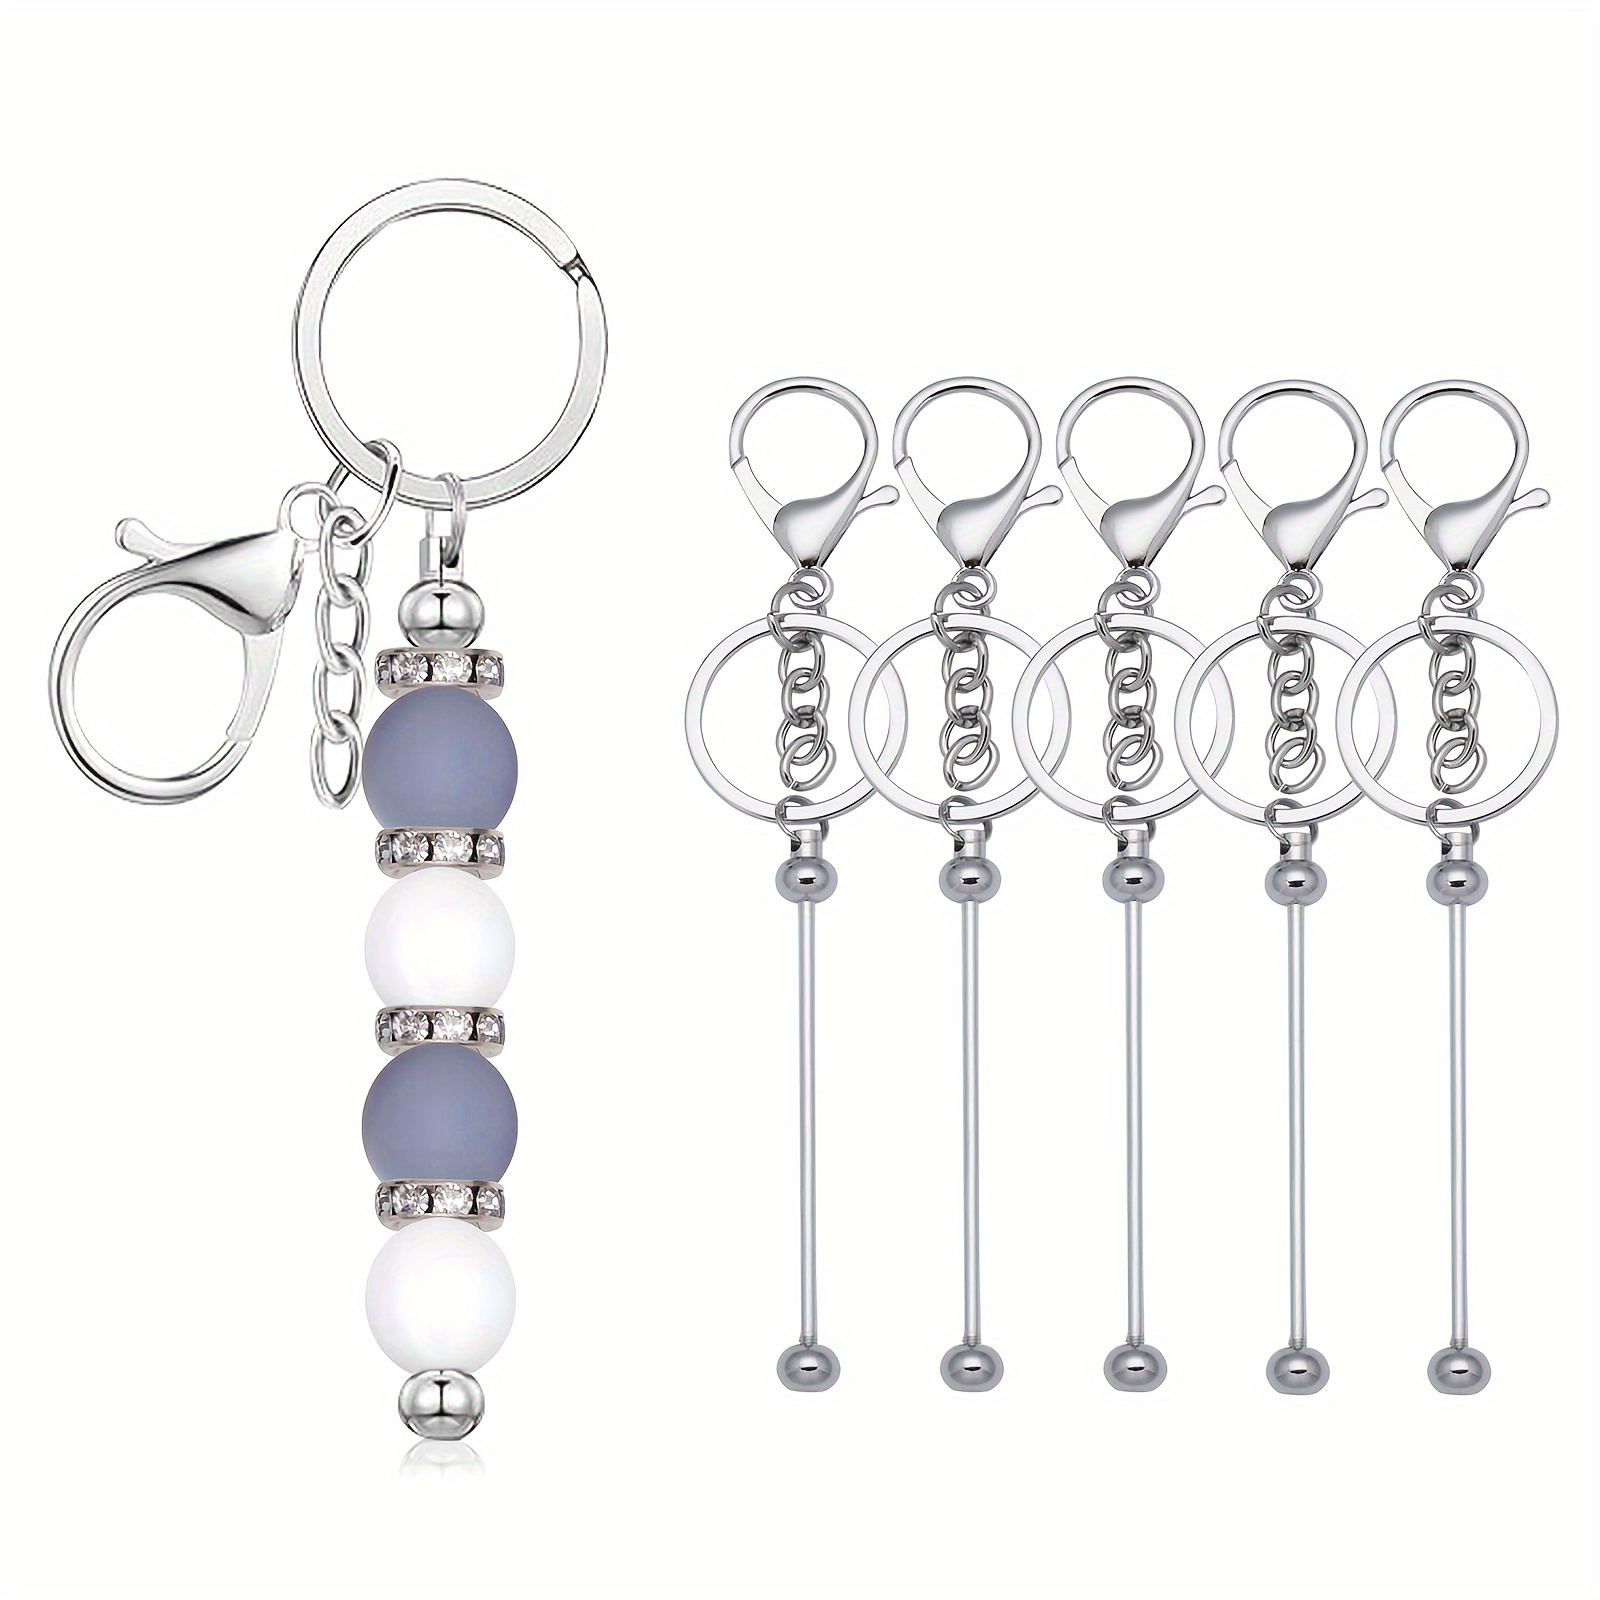 50pcs D Snap Hook Keychain Rings Bulk For Keychain Ma And Sewing Project